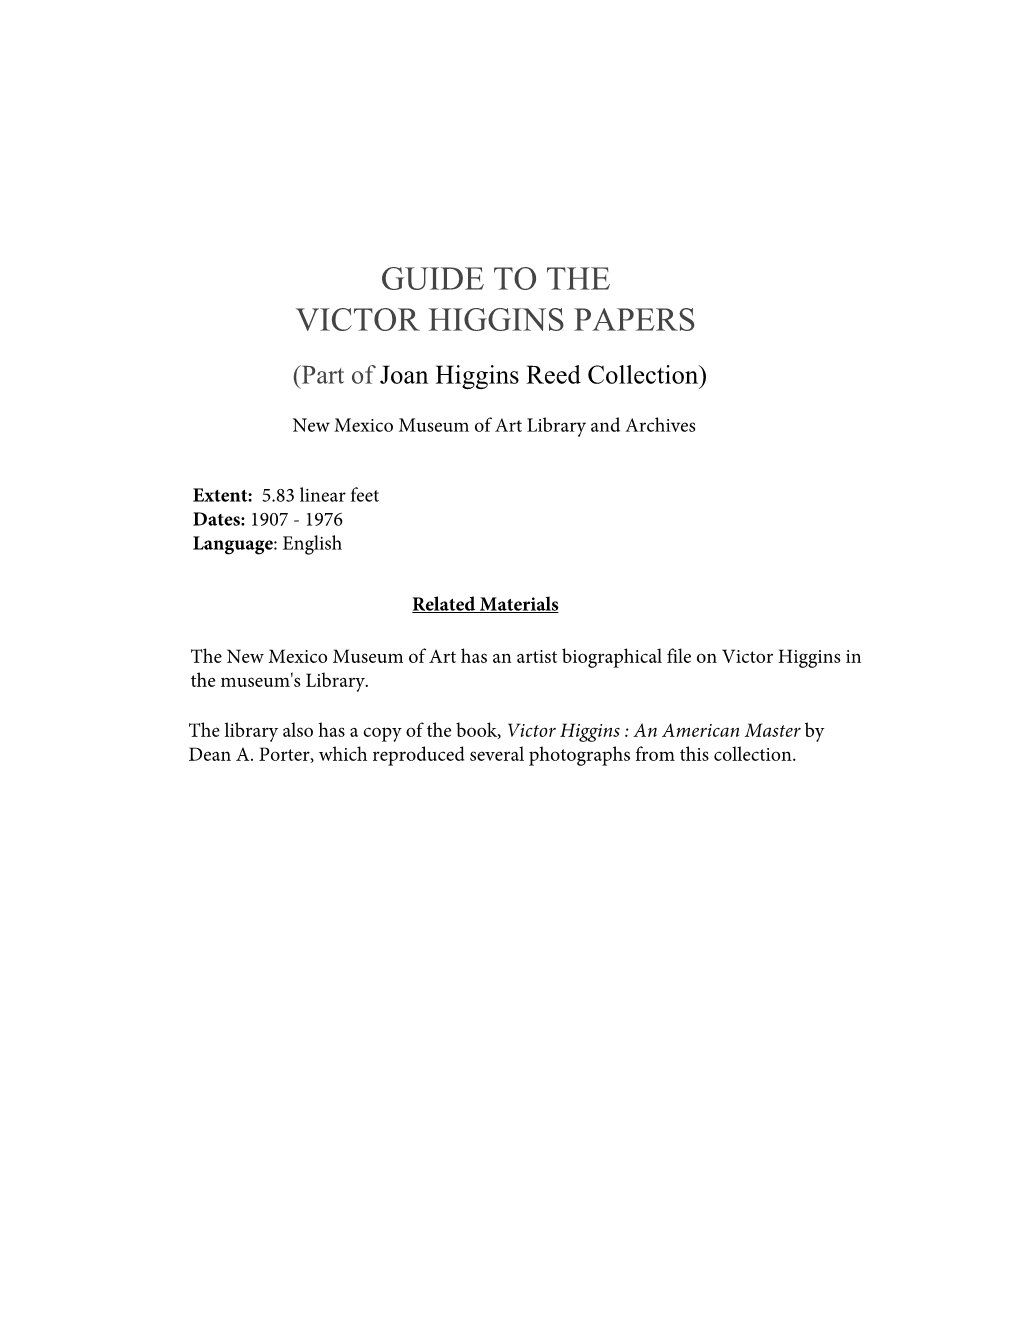 GUIDE to the VICTOR HIGGINS PAPERS (Part of Joan Higgins Reed Collection)